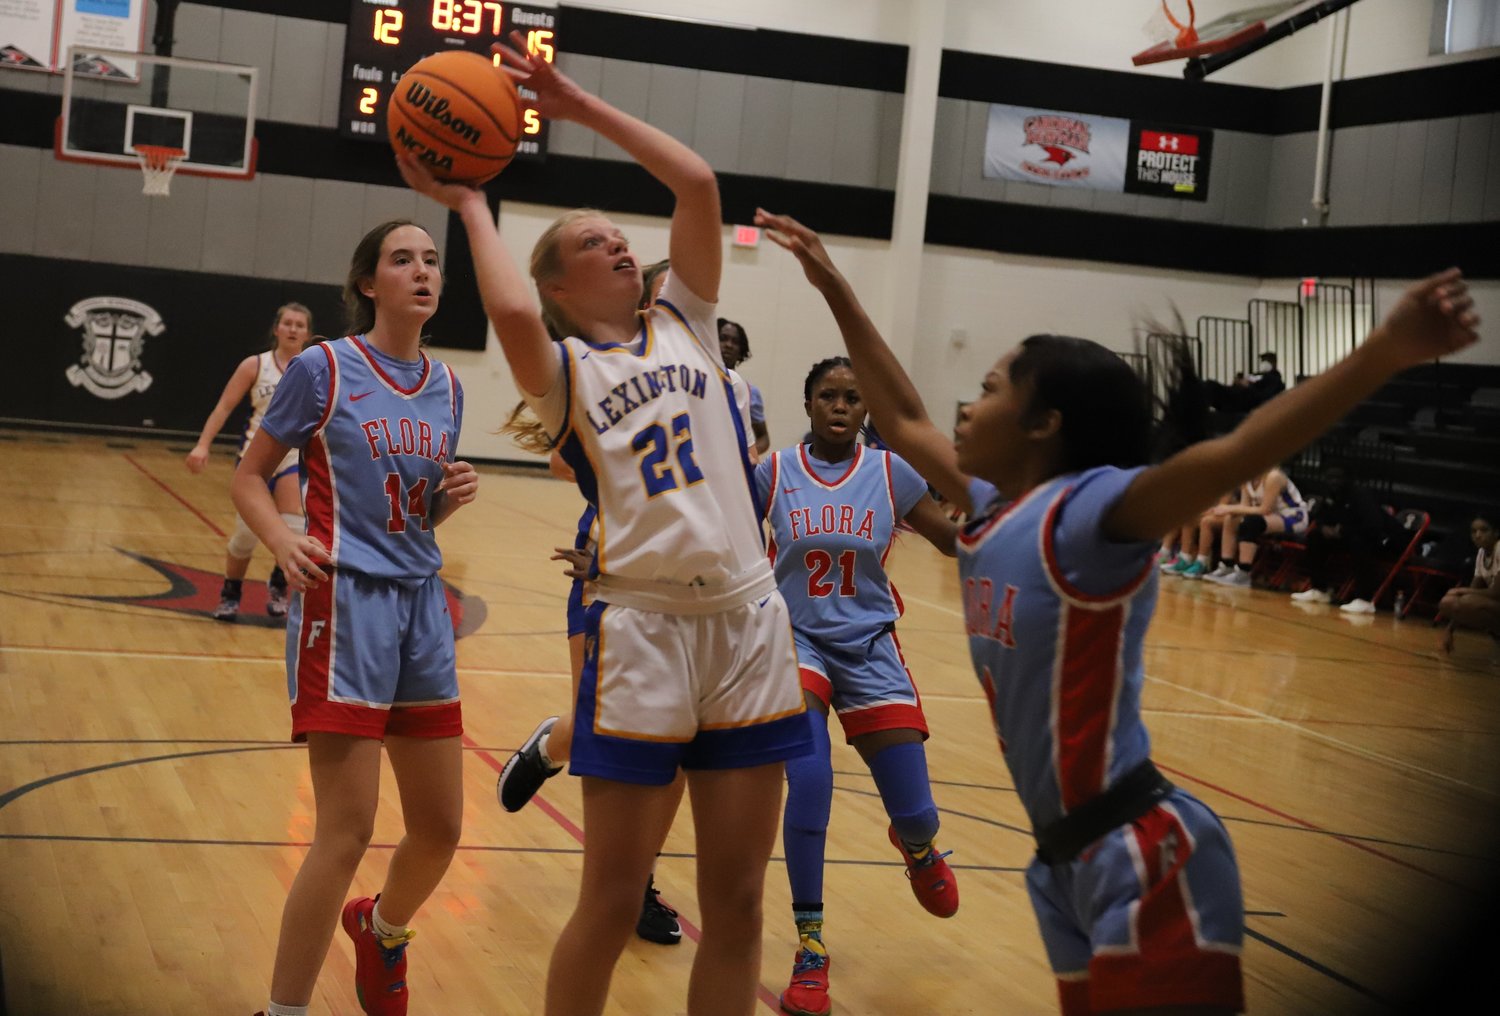 Lexington guard Izzy Saville goes up for the jumper.